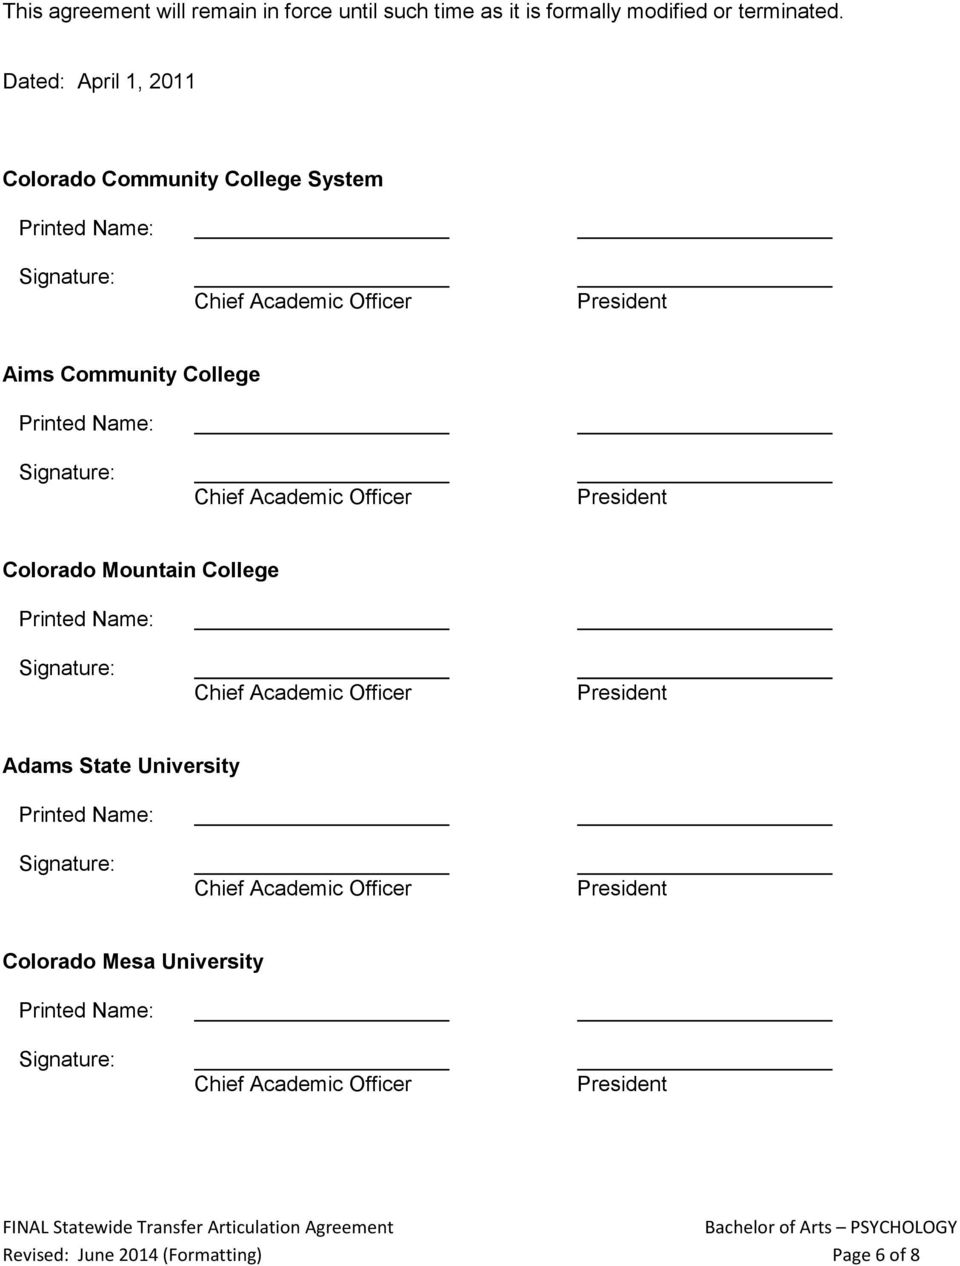 Dated: April 1, 2011 Colorado Community College System Aims Community